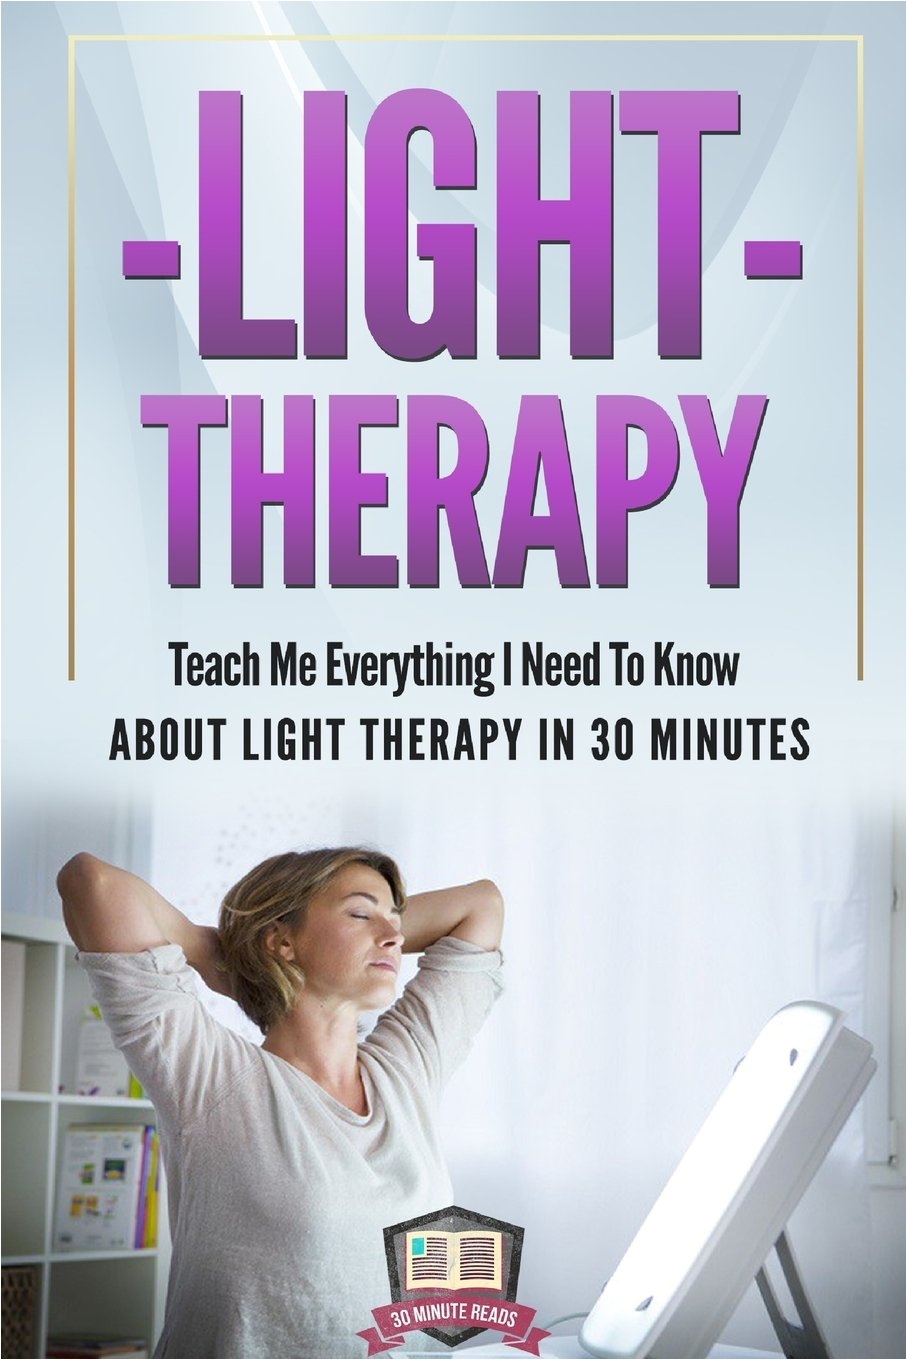 light therapy teach me everything i need to know about light therapy in 30 minutes light therapy season affective disorder sad vitamin d 30 minute